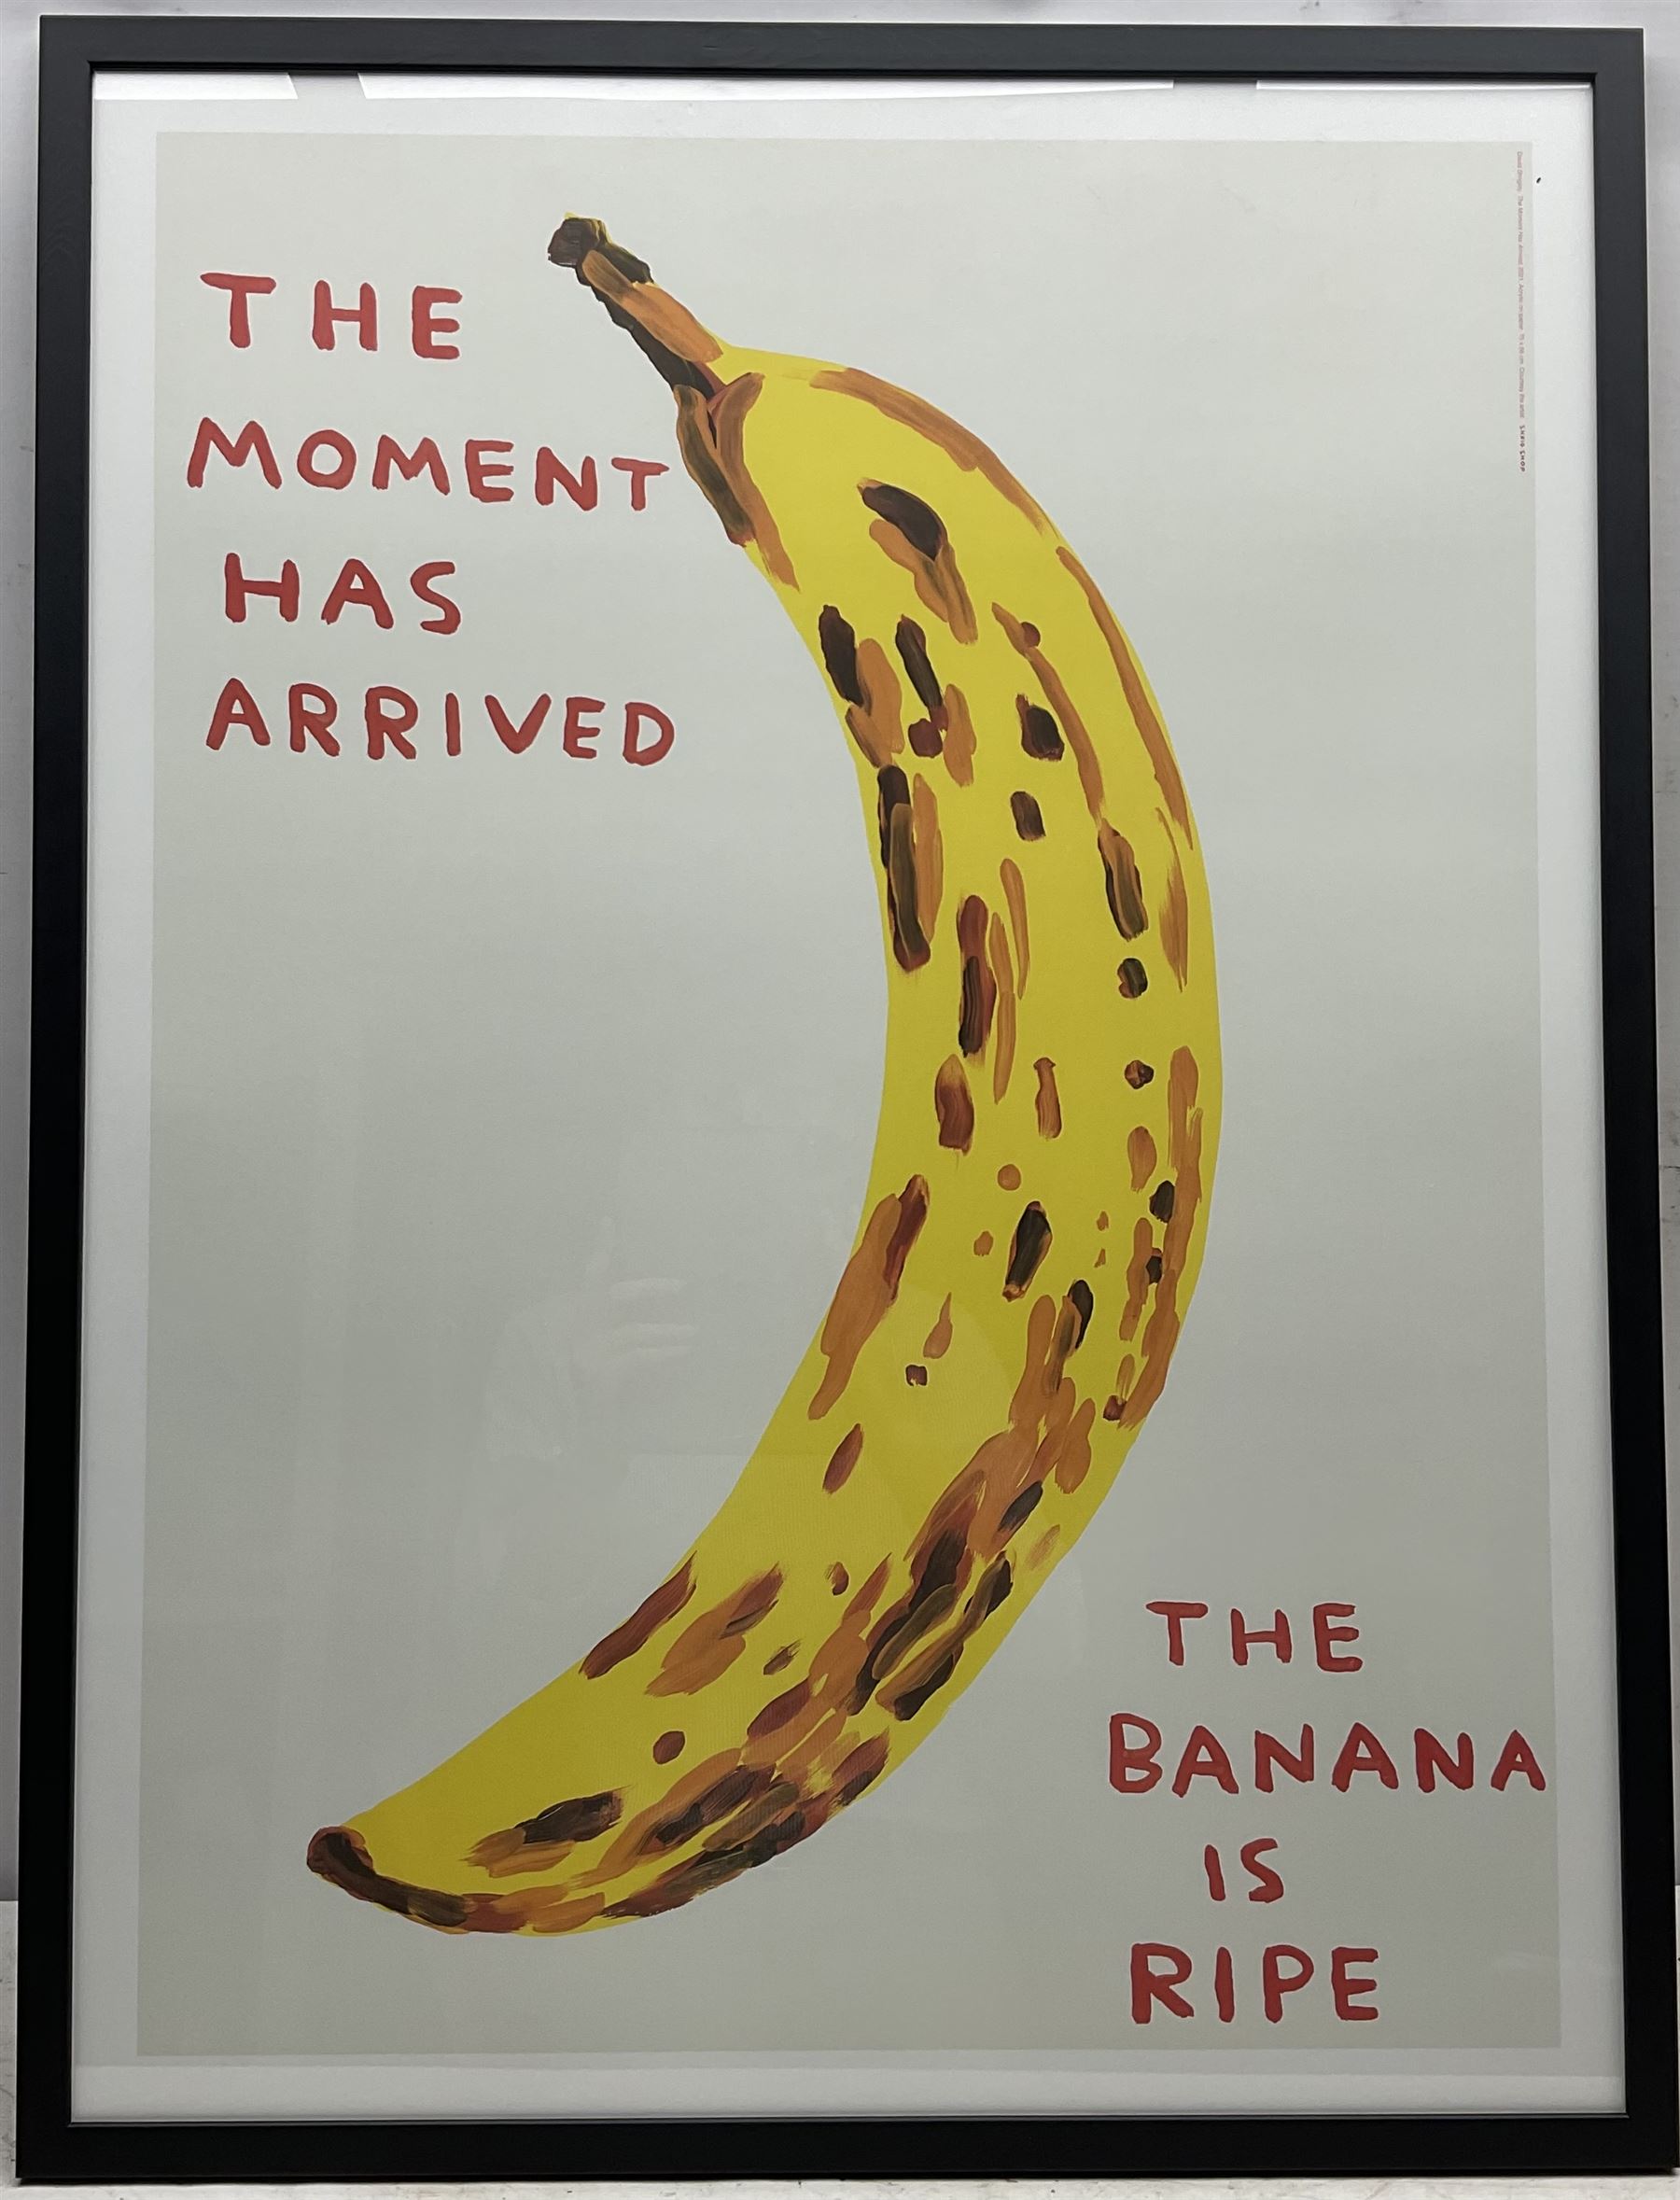 David Shrigley OBE (British 1968-): 'The moment has arrived - The banana is ripe' - Image 2 of 2